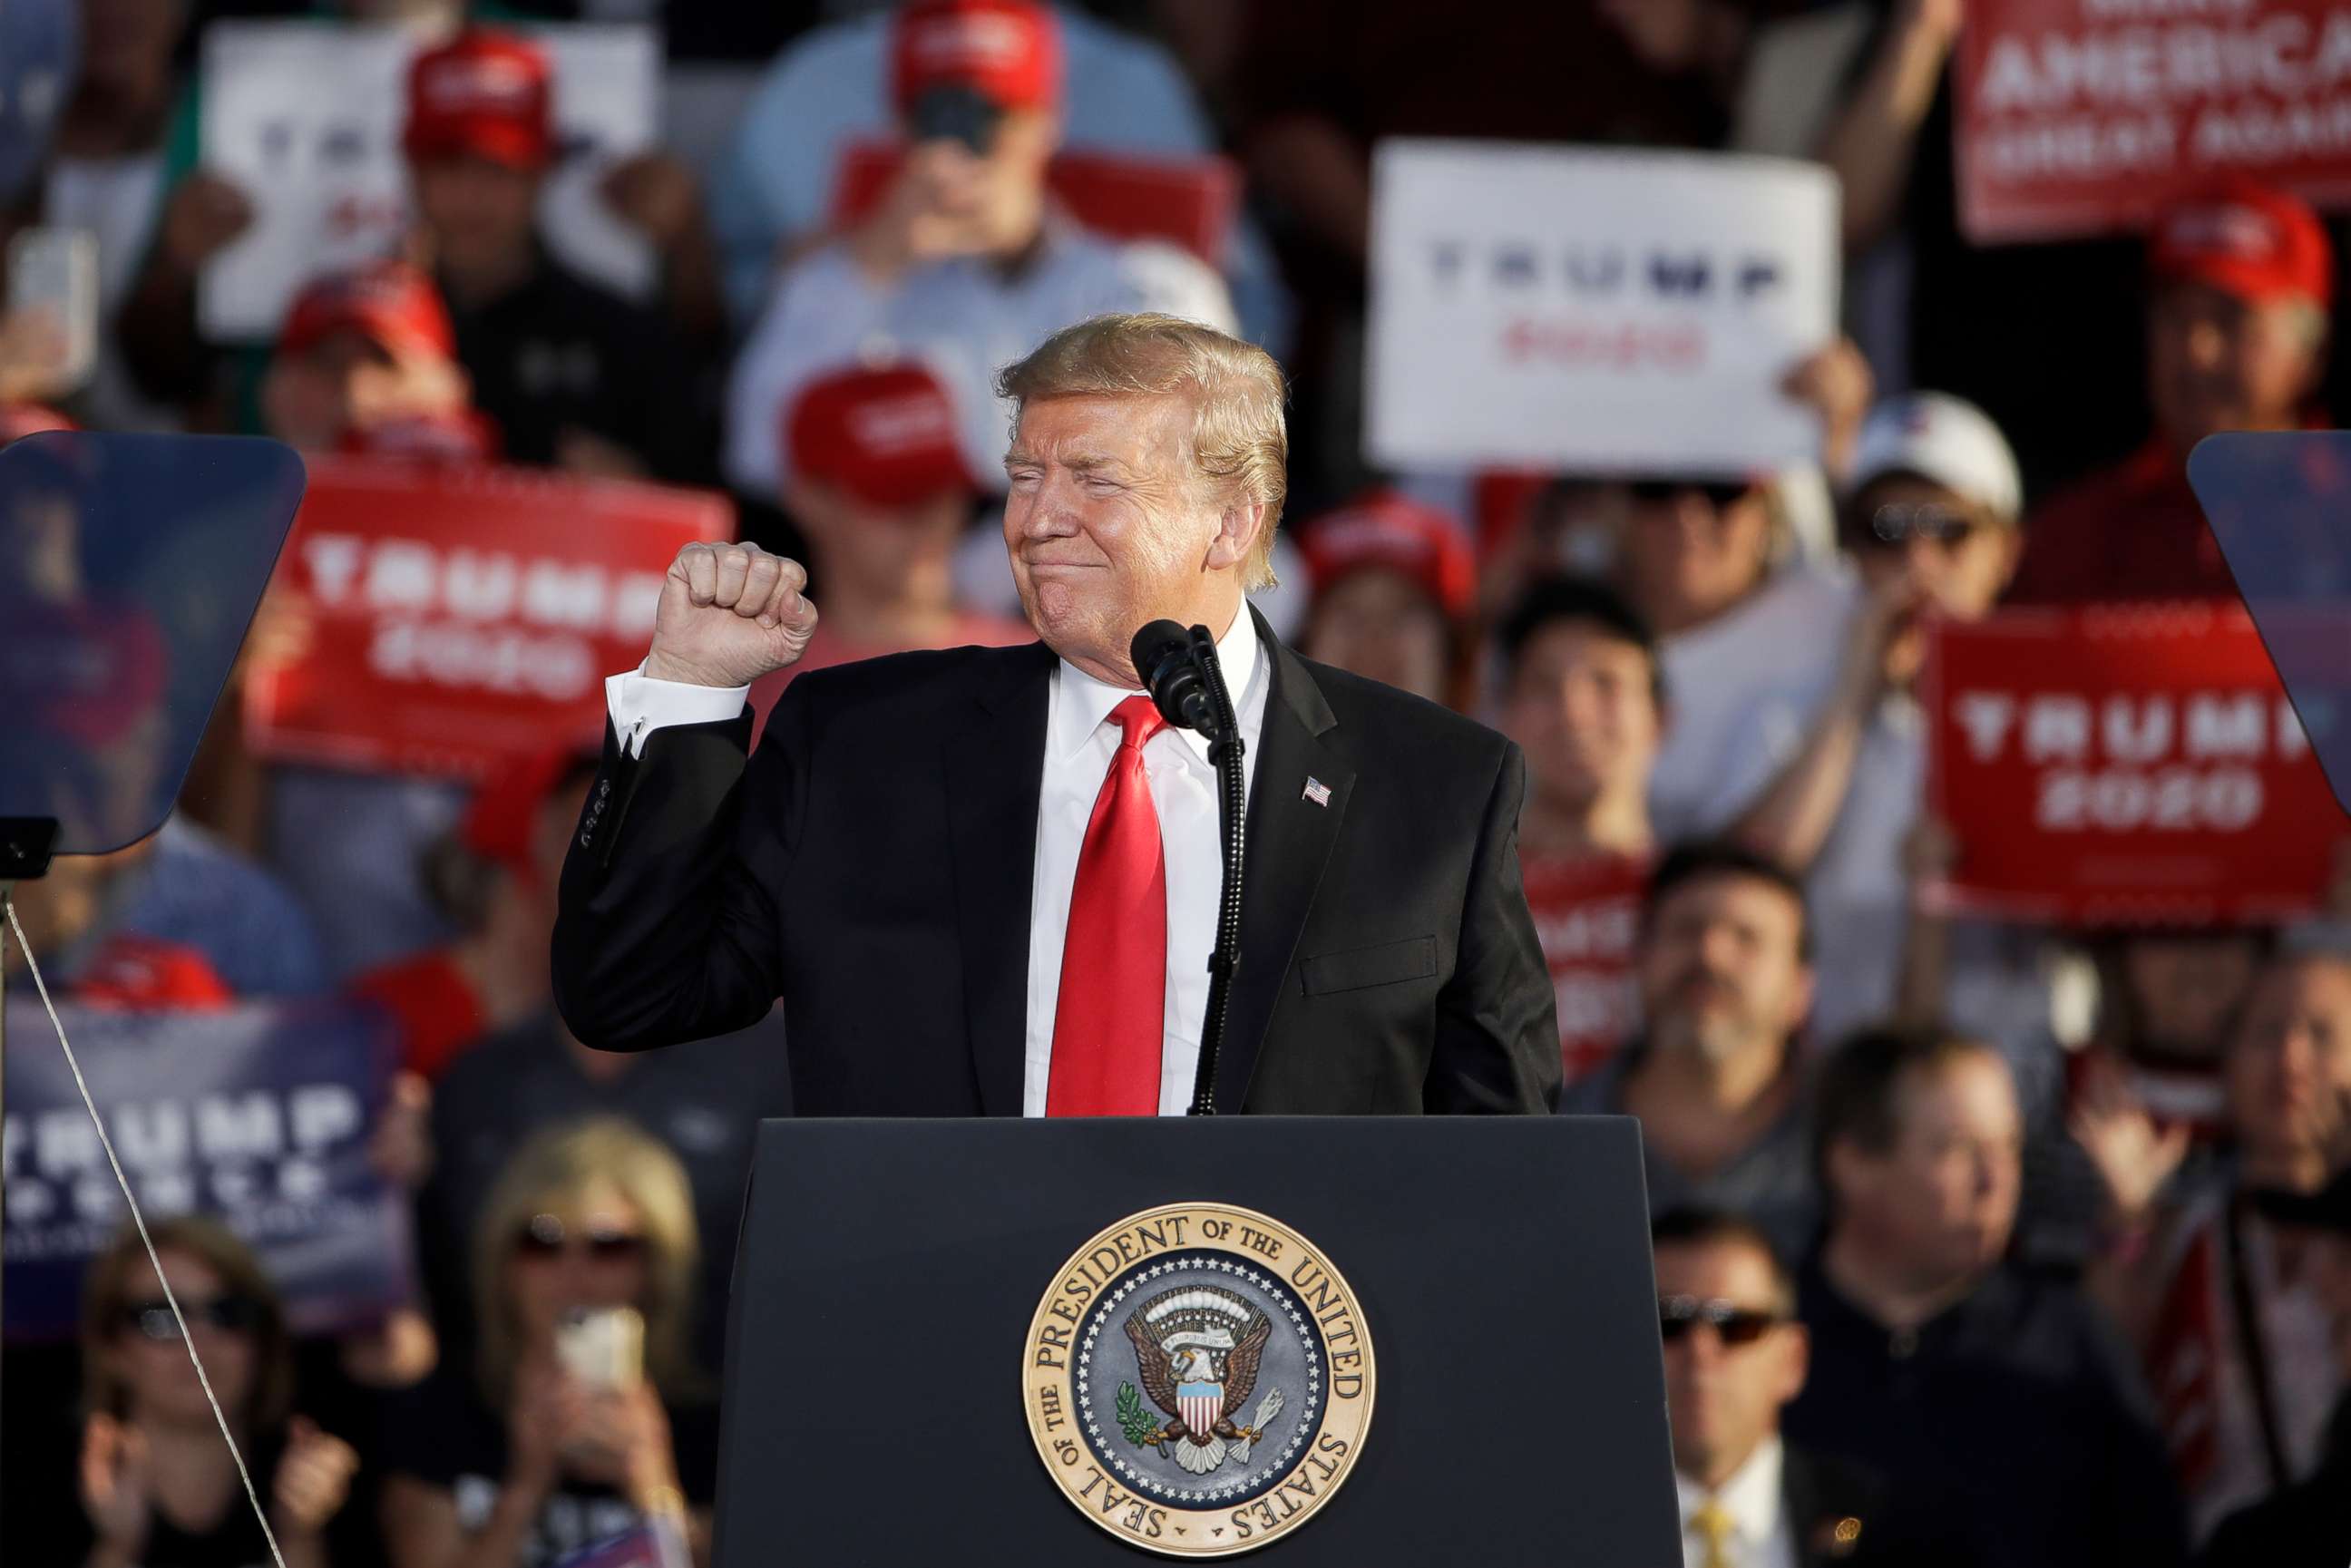 PHOTO: President Donald Trump gestures during a campaign rally in Montoursville, Pa., May 20, 2019.